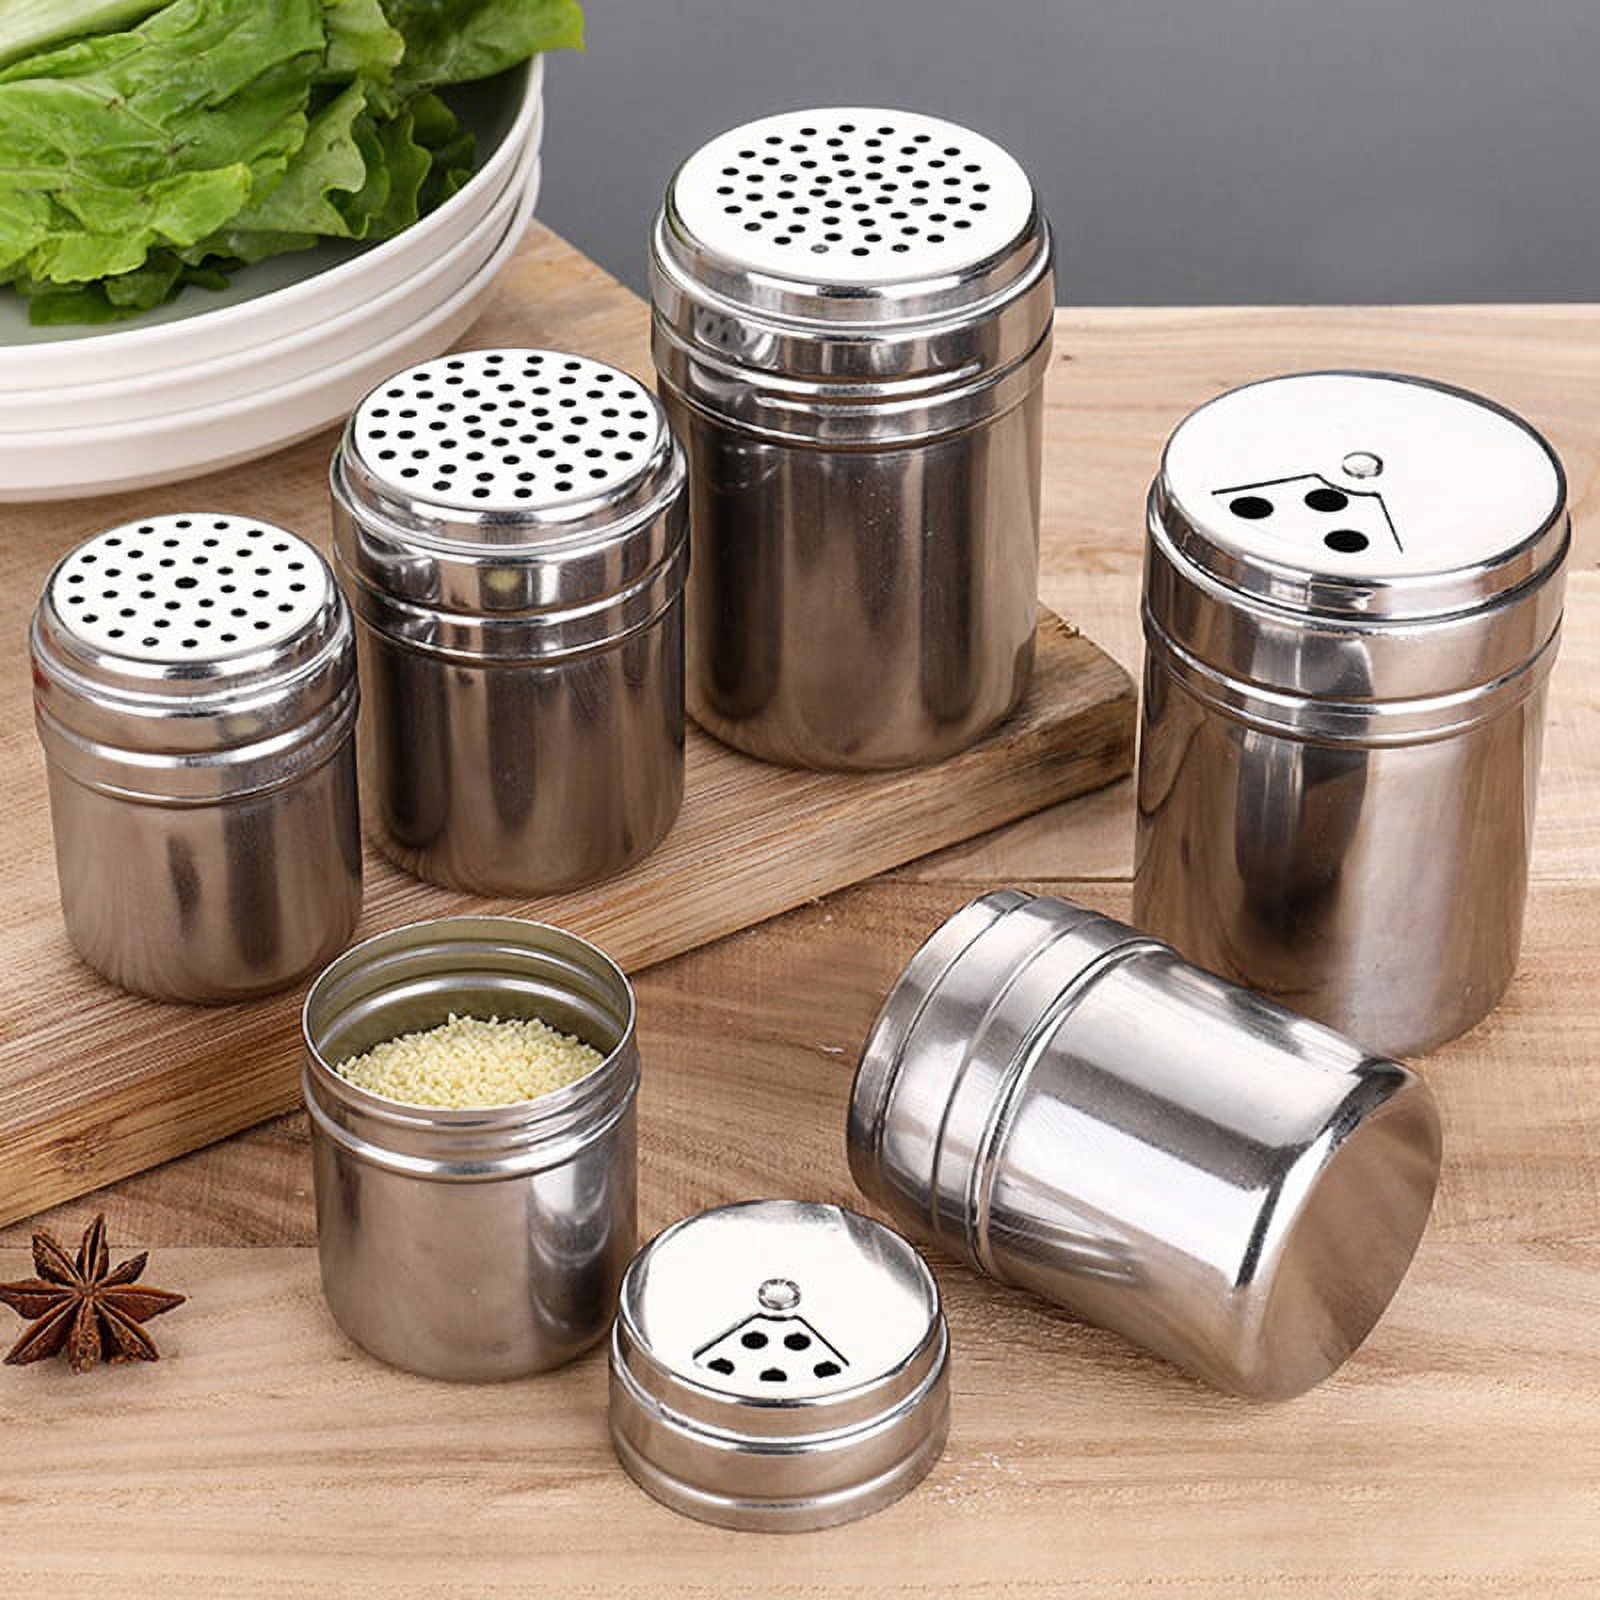 Wholesale Salt and Pepper Shaker Set Modern Home Country Kitchen DÃ©cor  Inspired Design - at 